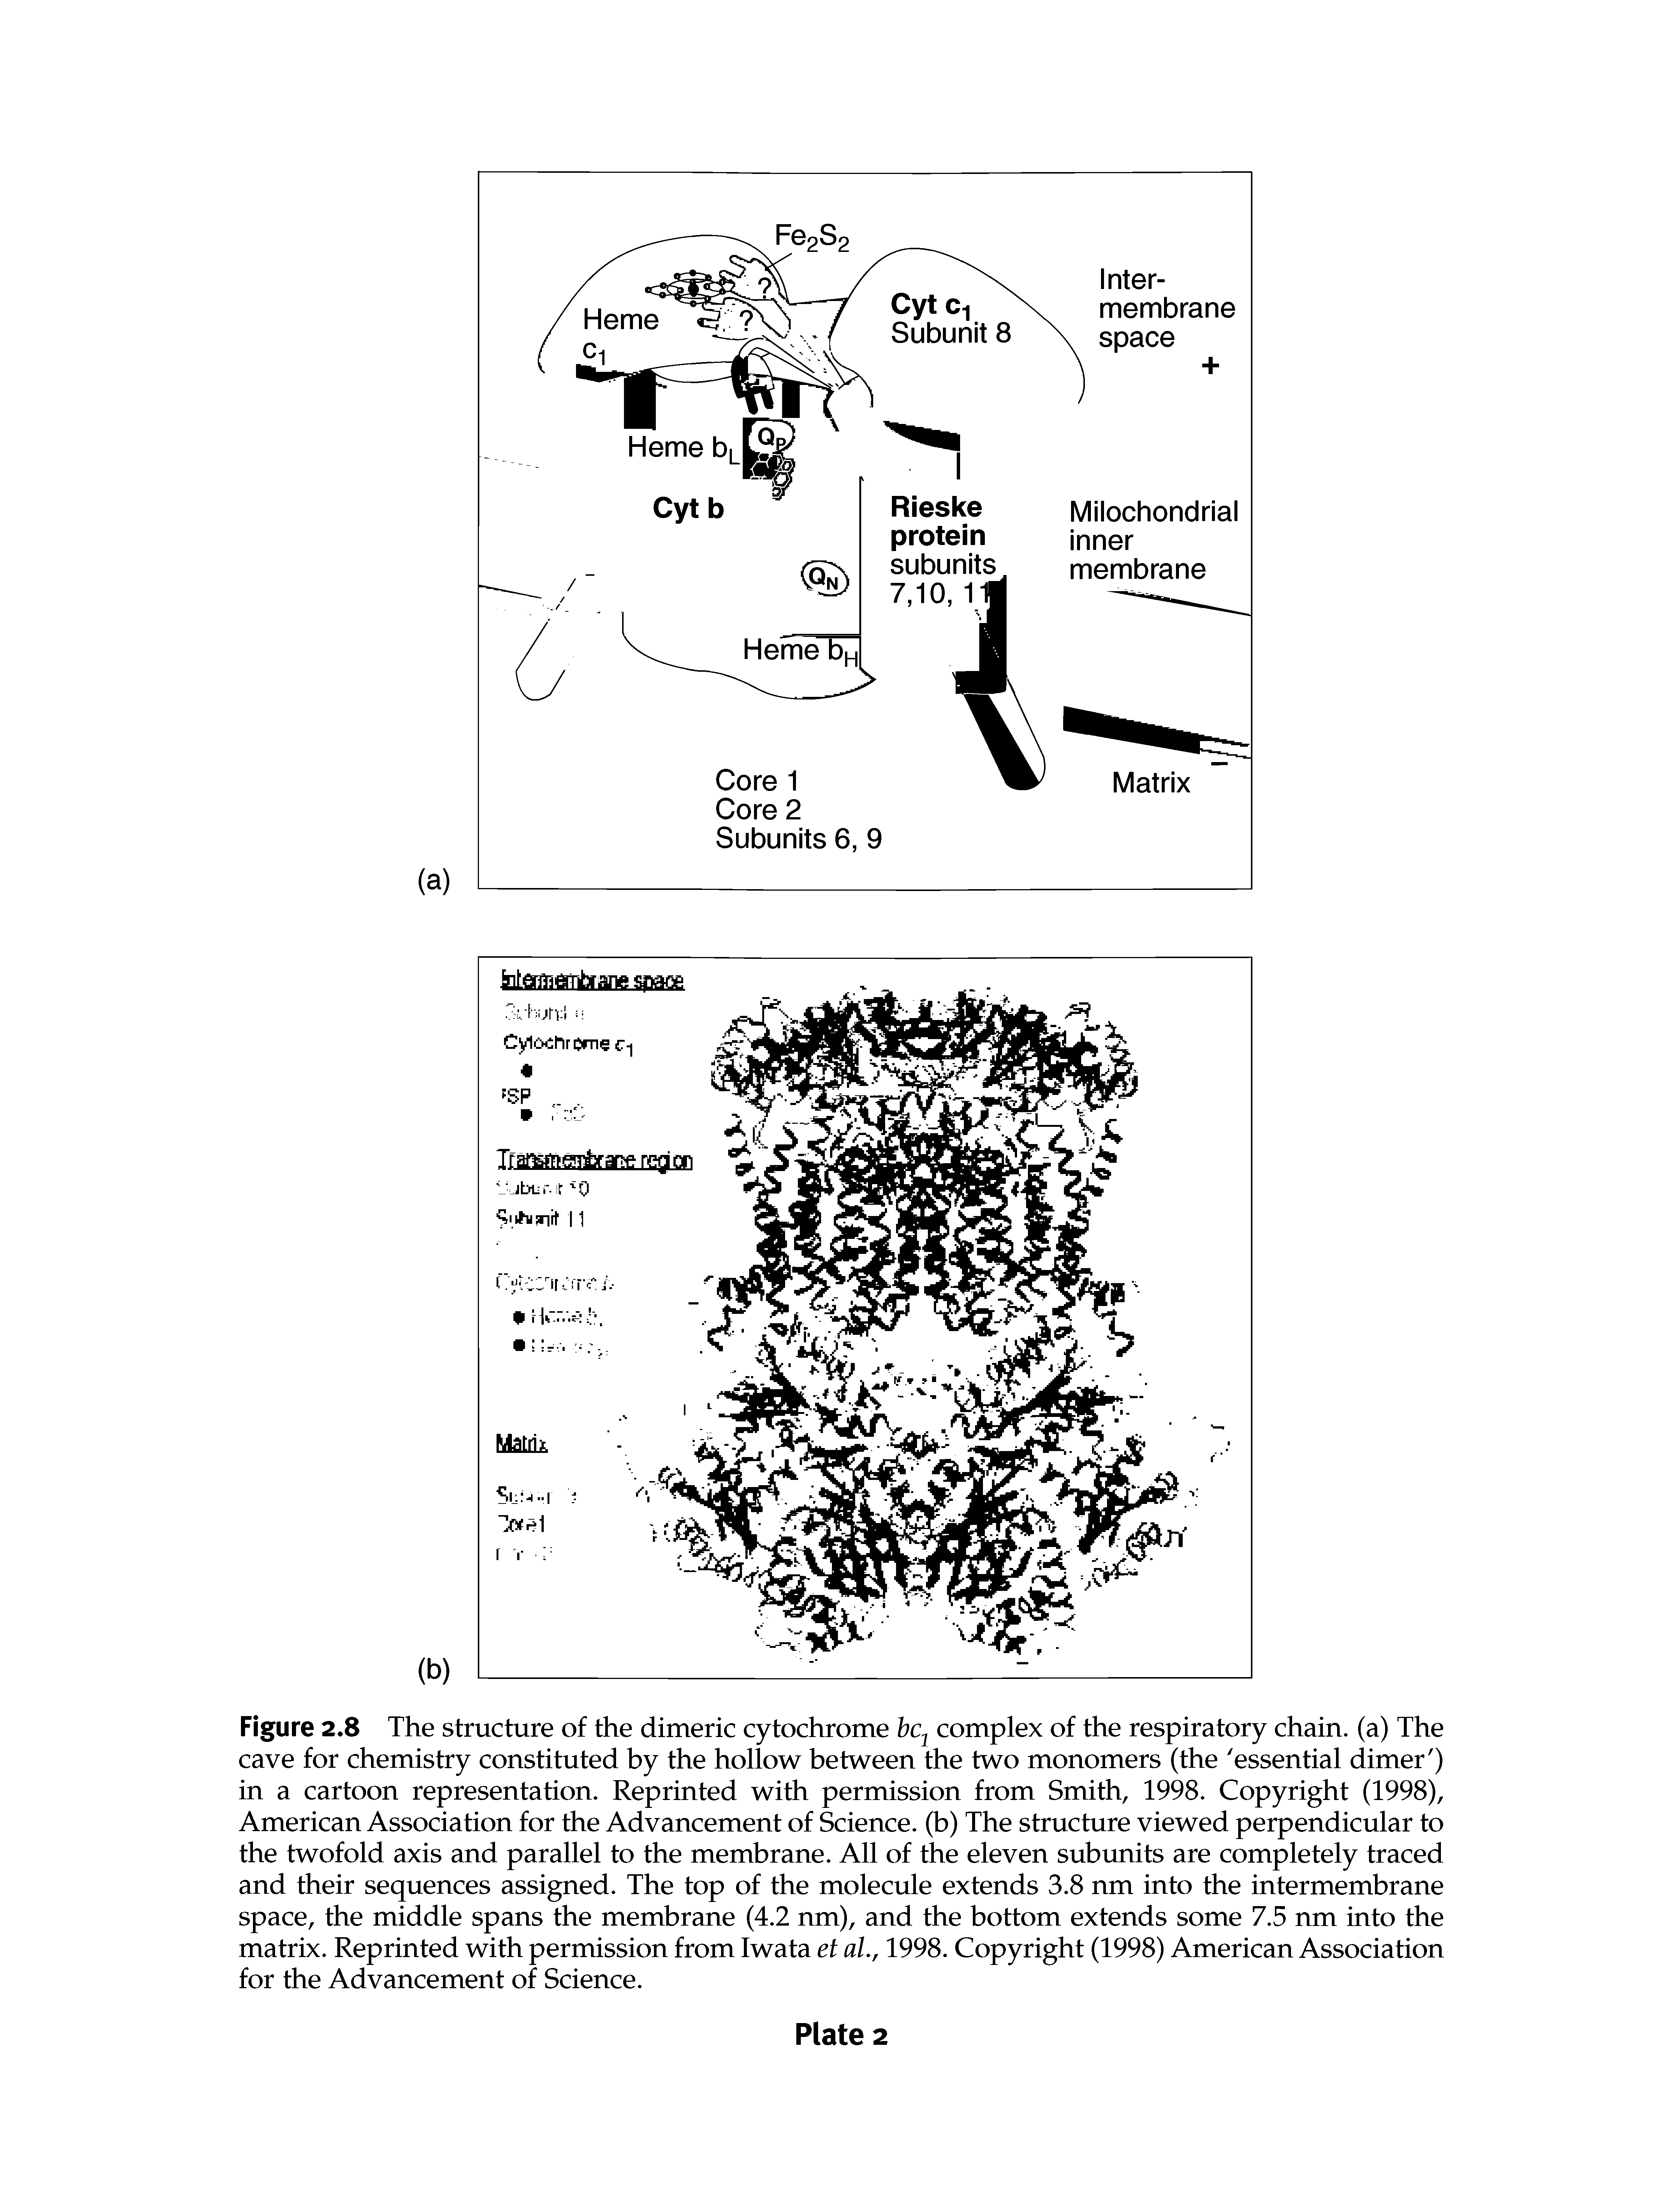 Figure 2.8 The structure of the dimeric cytochrome bcomplex of the respiratory chain, (a) The cave for chemistry constituted by the hollow between the two monomers (the essential dimer ) in a cartoon representation. Reprinted with permission from Smith, 1998. Copyright (1998), American Association for the Advancement of Science, (b) The structure viewed perpendicular to the twofold axis and parallel to the membrane. All of the eleven subunits are completely traced and their sequences assigned. The top of the molecule extends 3.8 nm into the intermembrane space, the middle spans the membrane (4.2 nm), and the bottom extends some 7.5 nm into the matrix. Reprinted with permission from Iwata et al., 1998. Copyright (1998) American Association for the Advancement of Science.